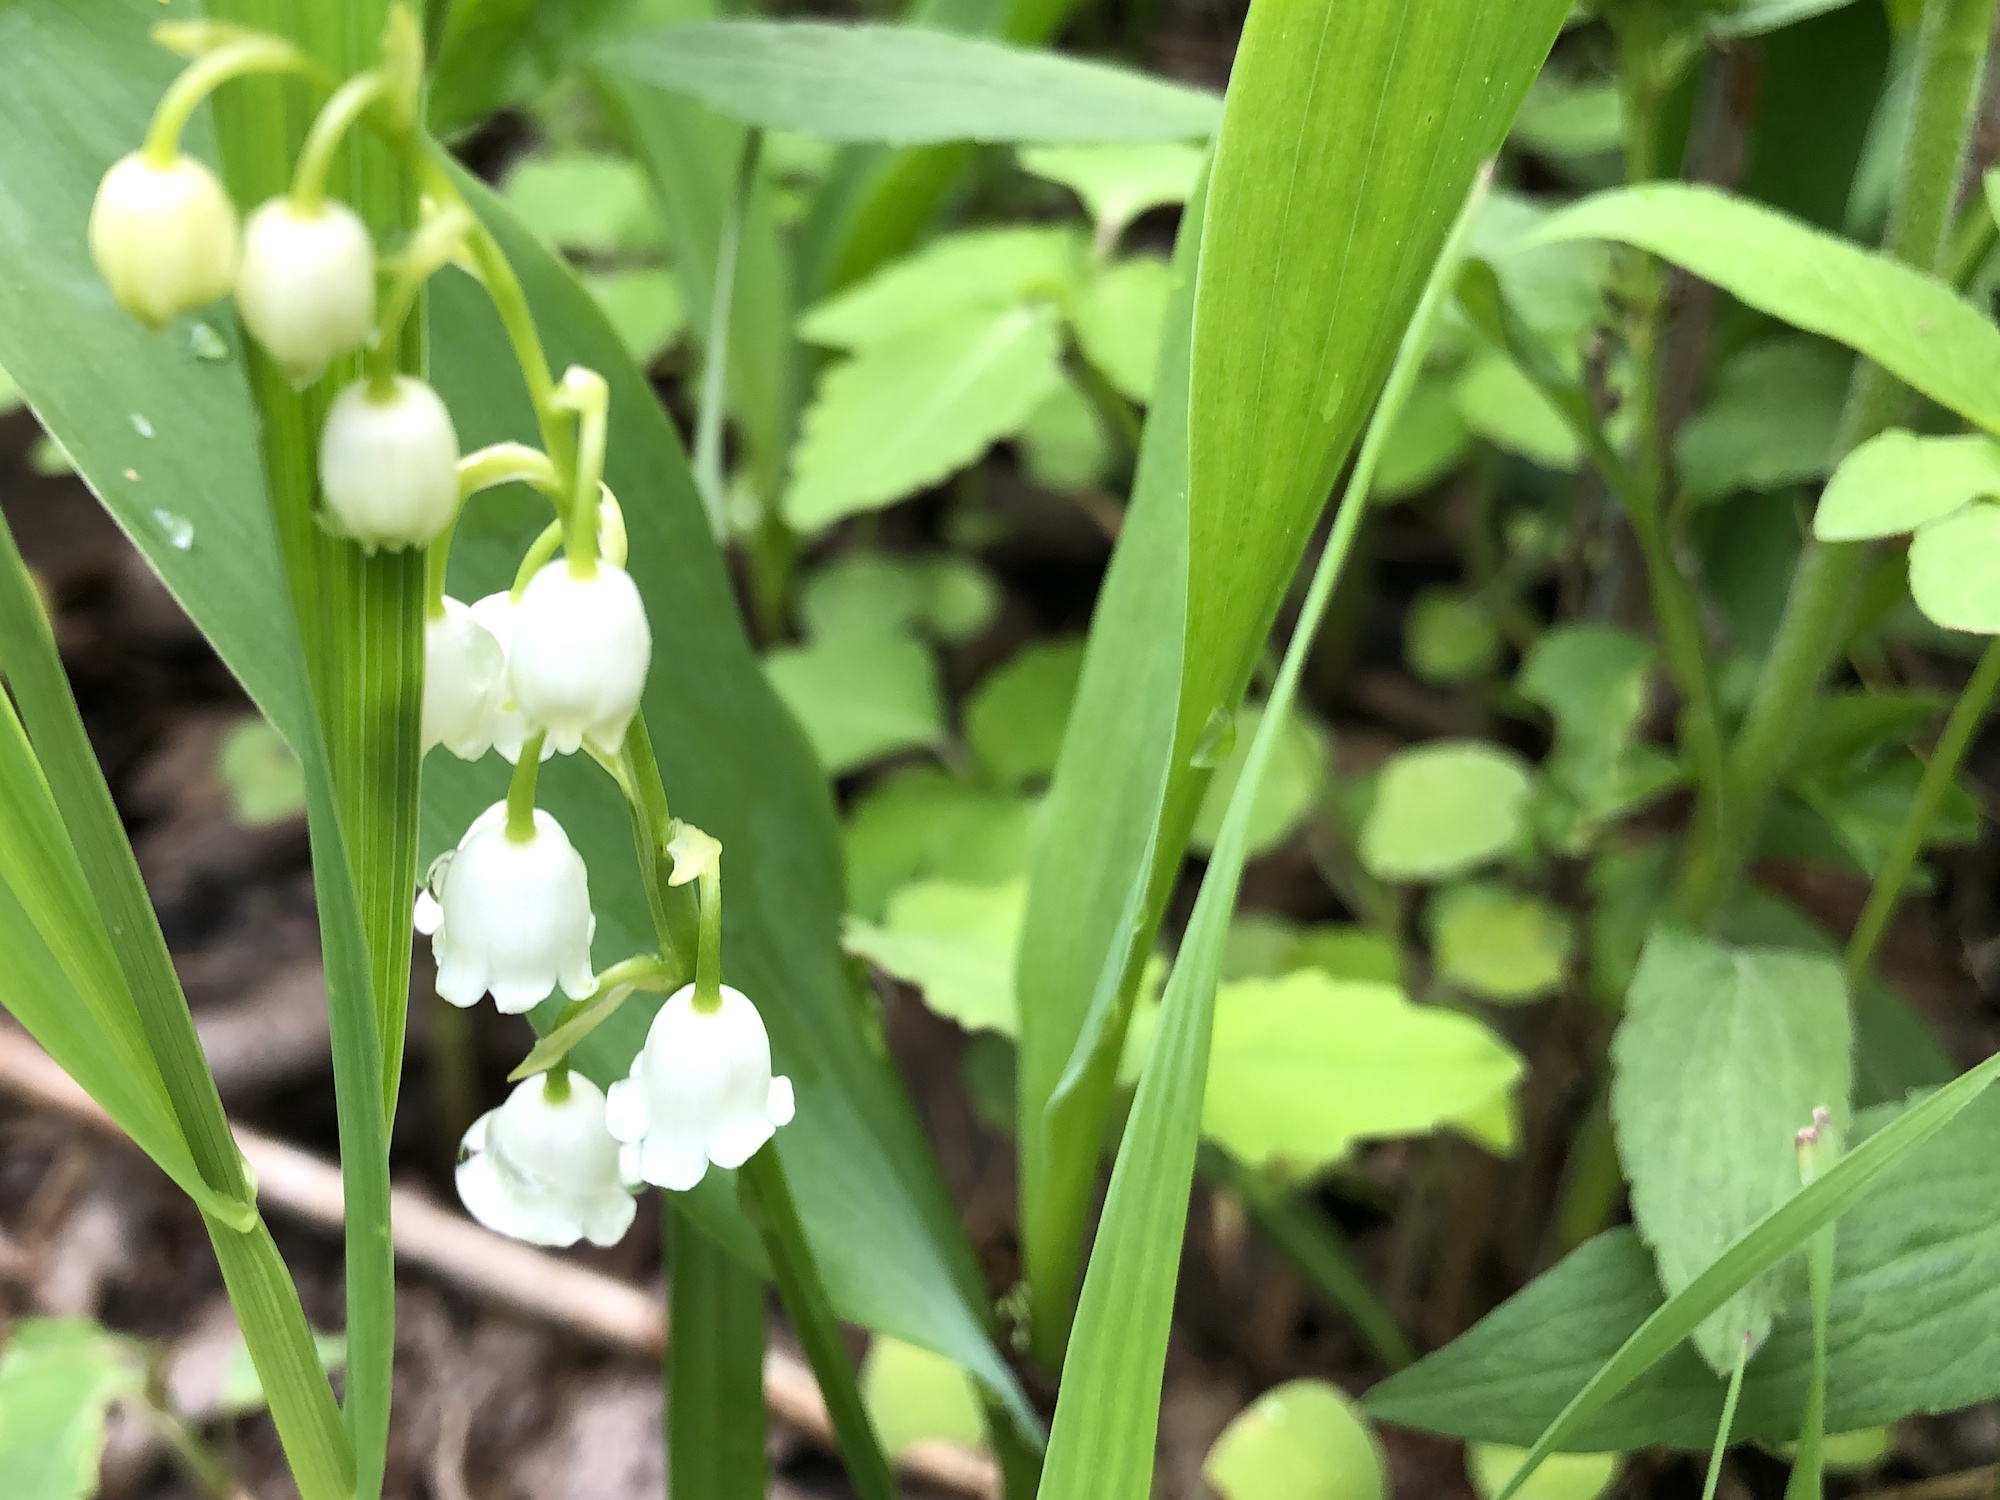  Lily of The Valley in Oak Savanna  on May 24, 2019.